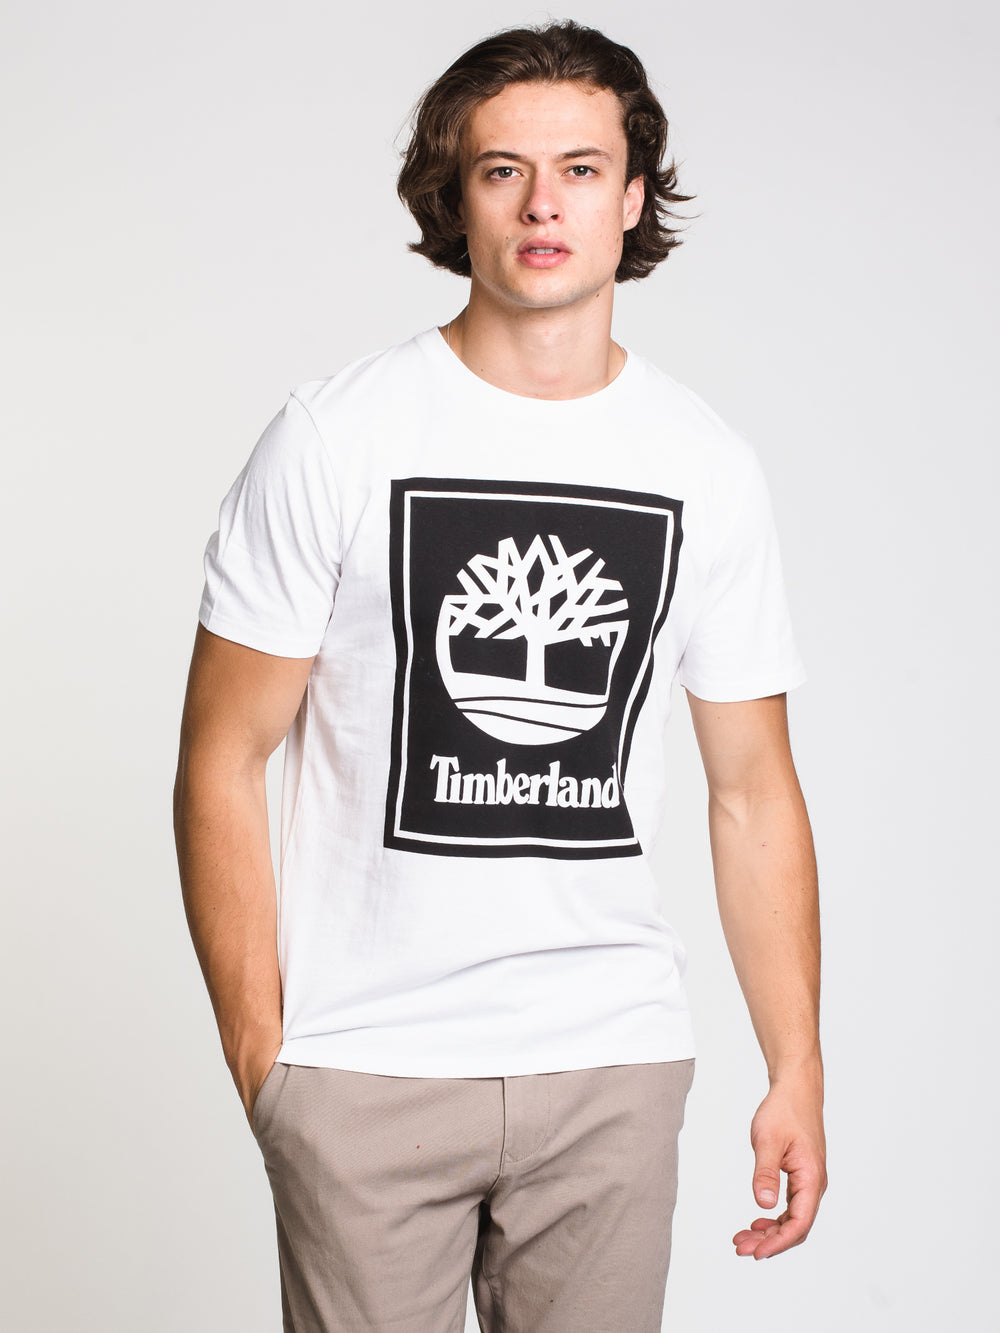 TIMBERLAND STACK LOGO T-SHIRT - CLEARANCE